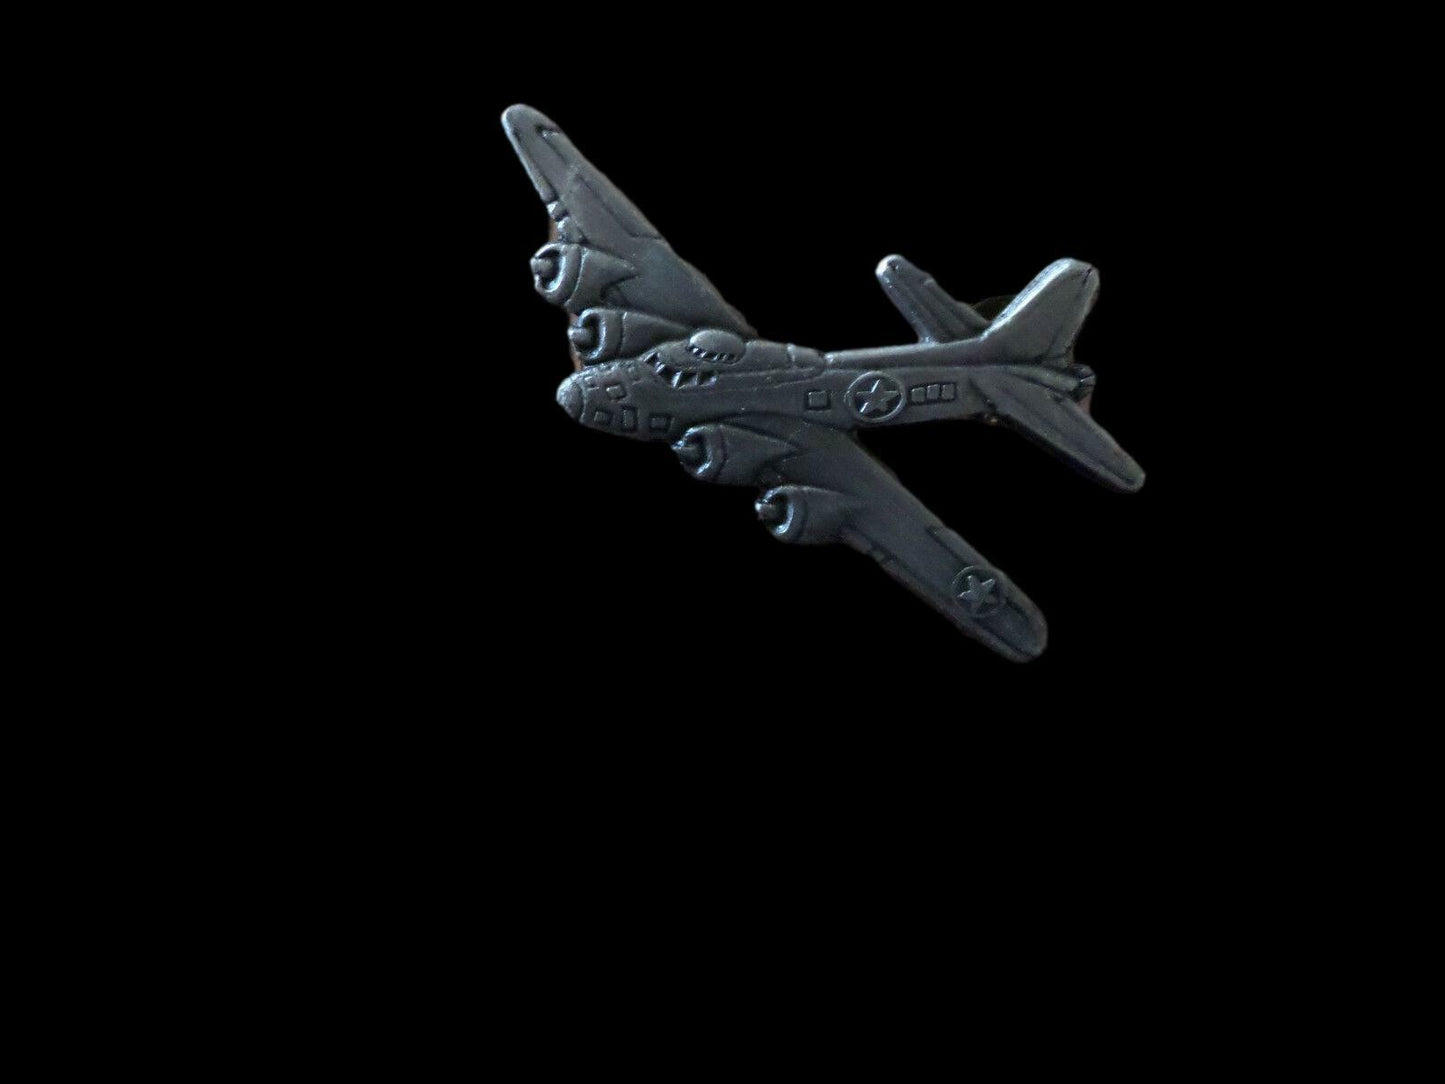 U.S MILITARY B-17 FLYING FORTRESS BOMBER PLANE HAT PIN BADGE DOUBLE CLUTCH BACK